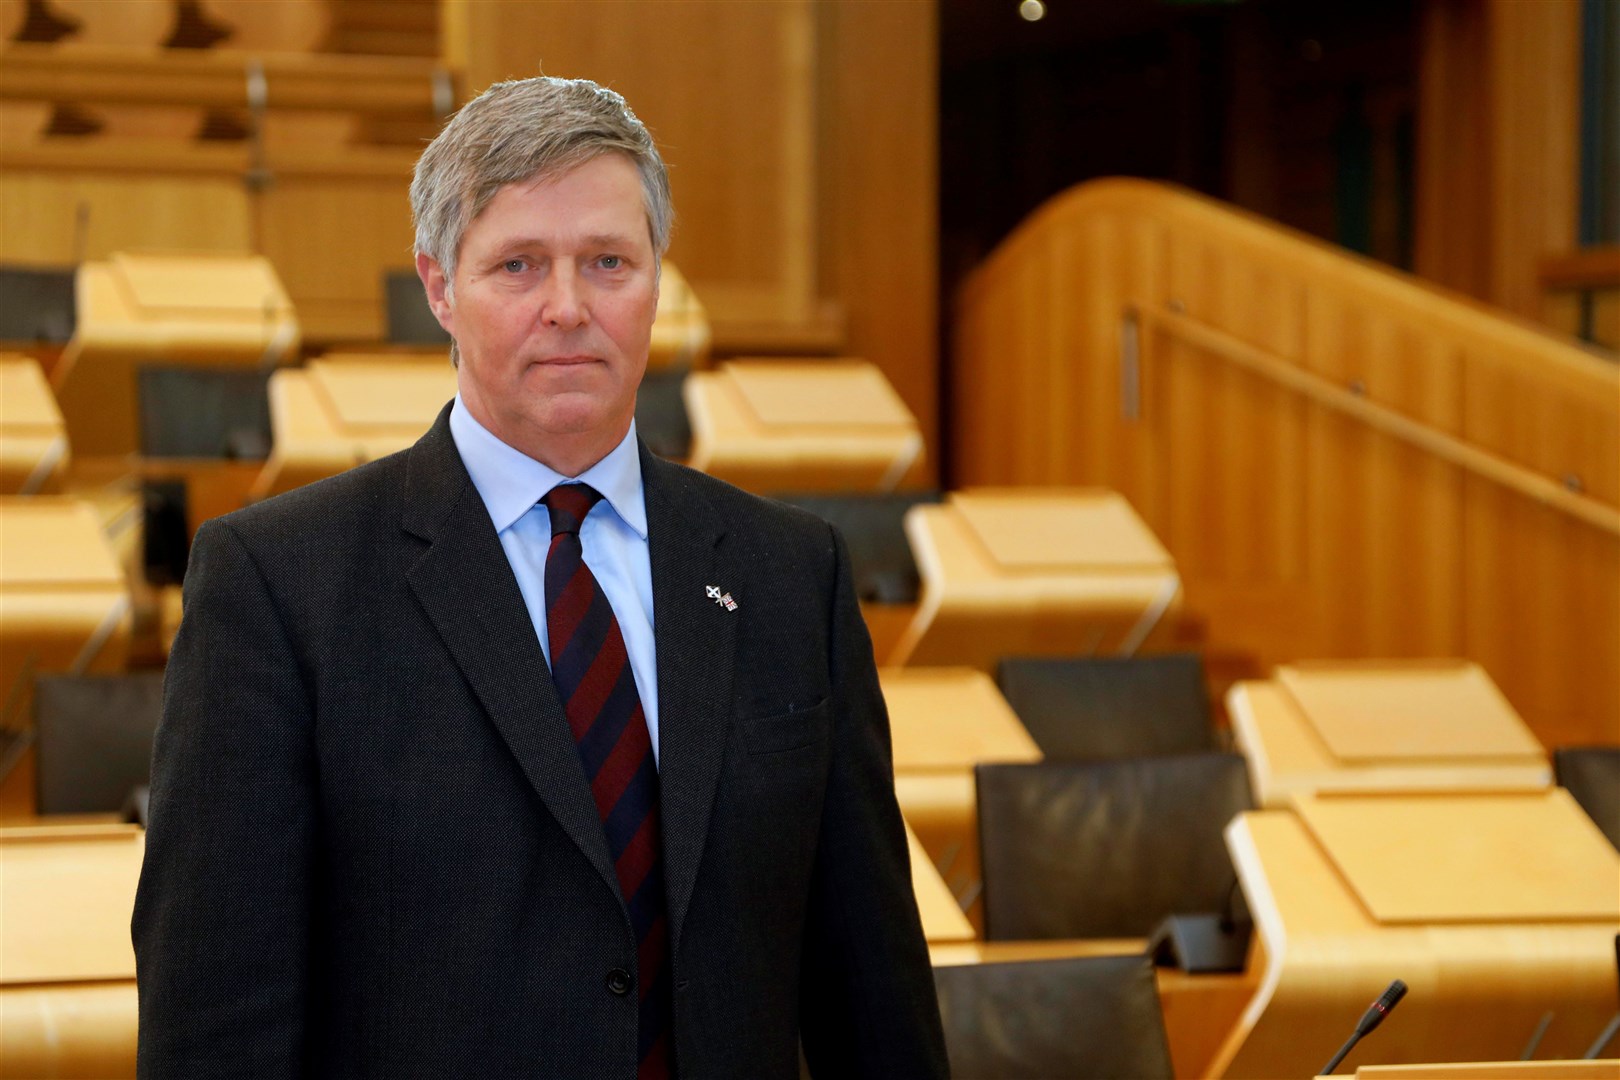 Edward Mountain MSP pictured in the chamber of the Scottish parliament. 31 January 2019. Pic - Andrew Cowan/Scottish Parliament.